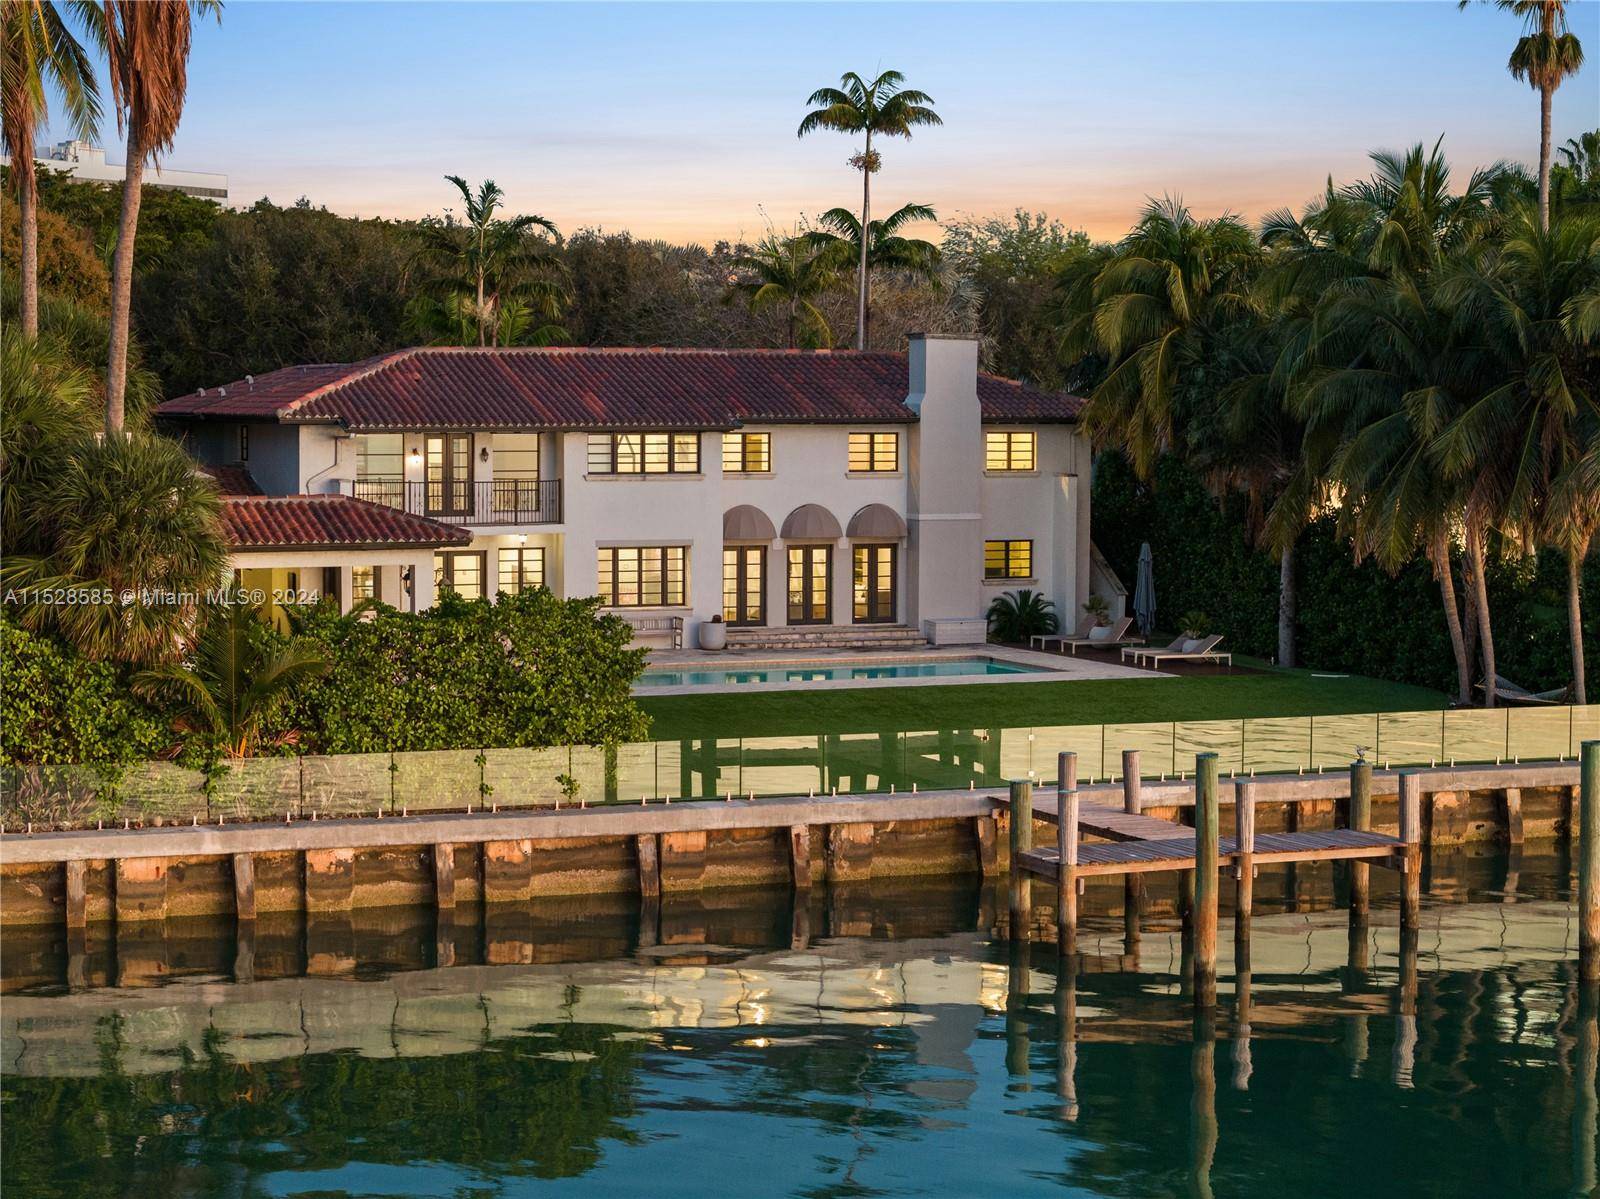 Spanish Mediterranean Architectural beauty on gated private Bay point.